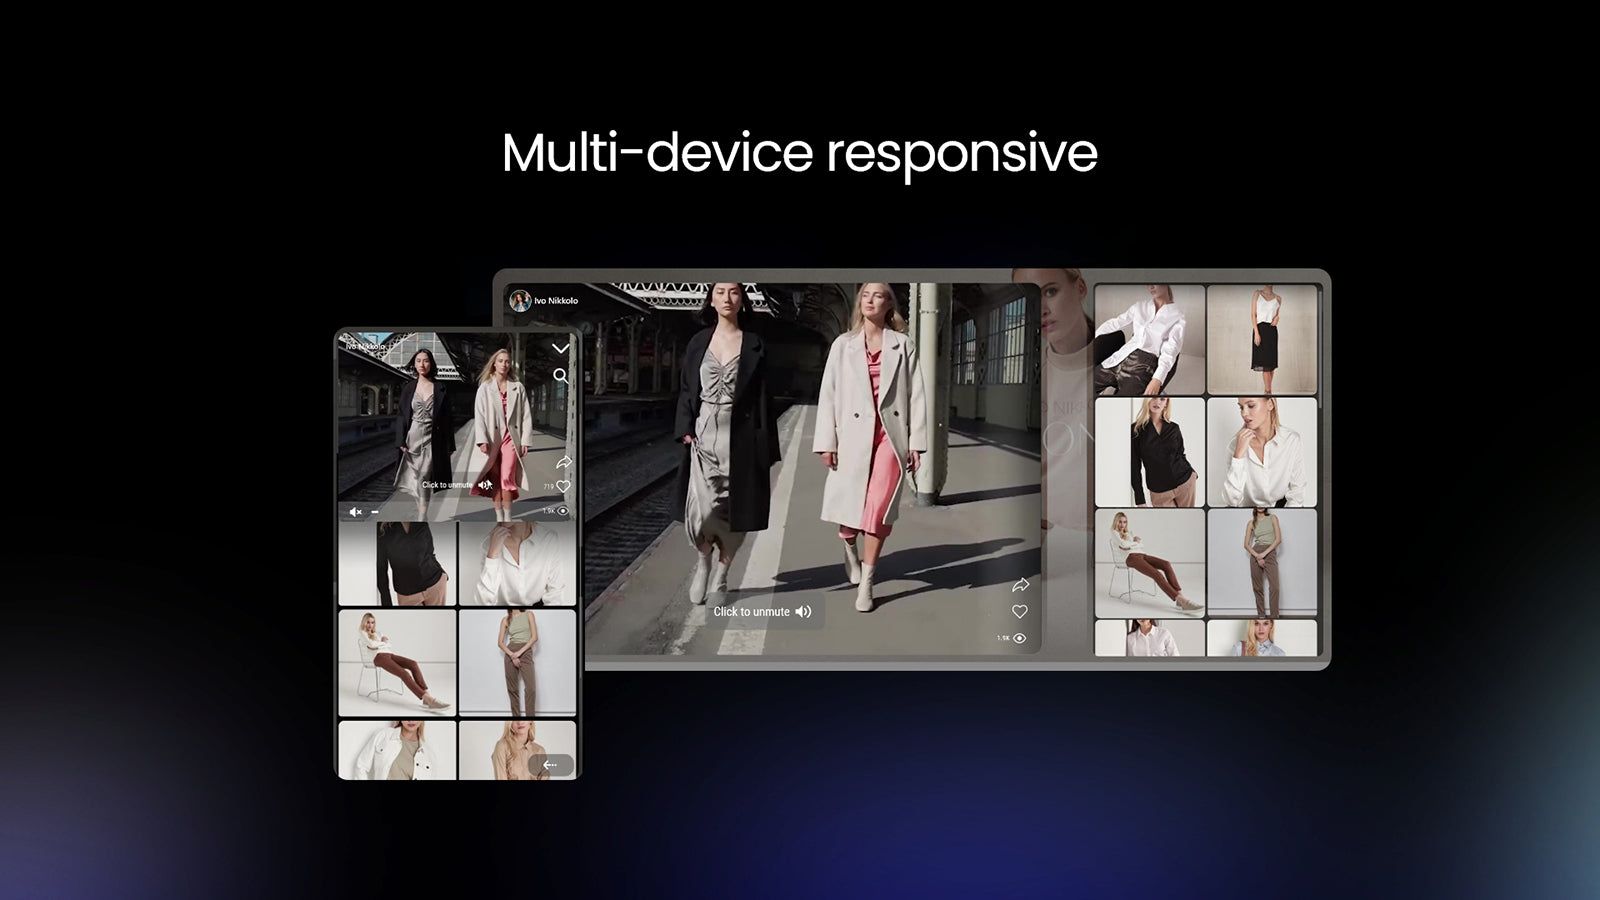 Smart responsiveness for both mobile and desktop modes